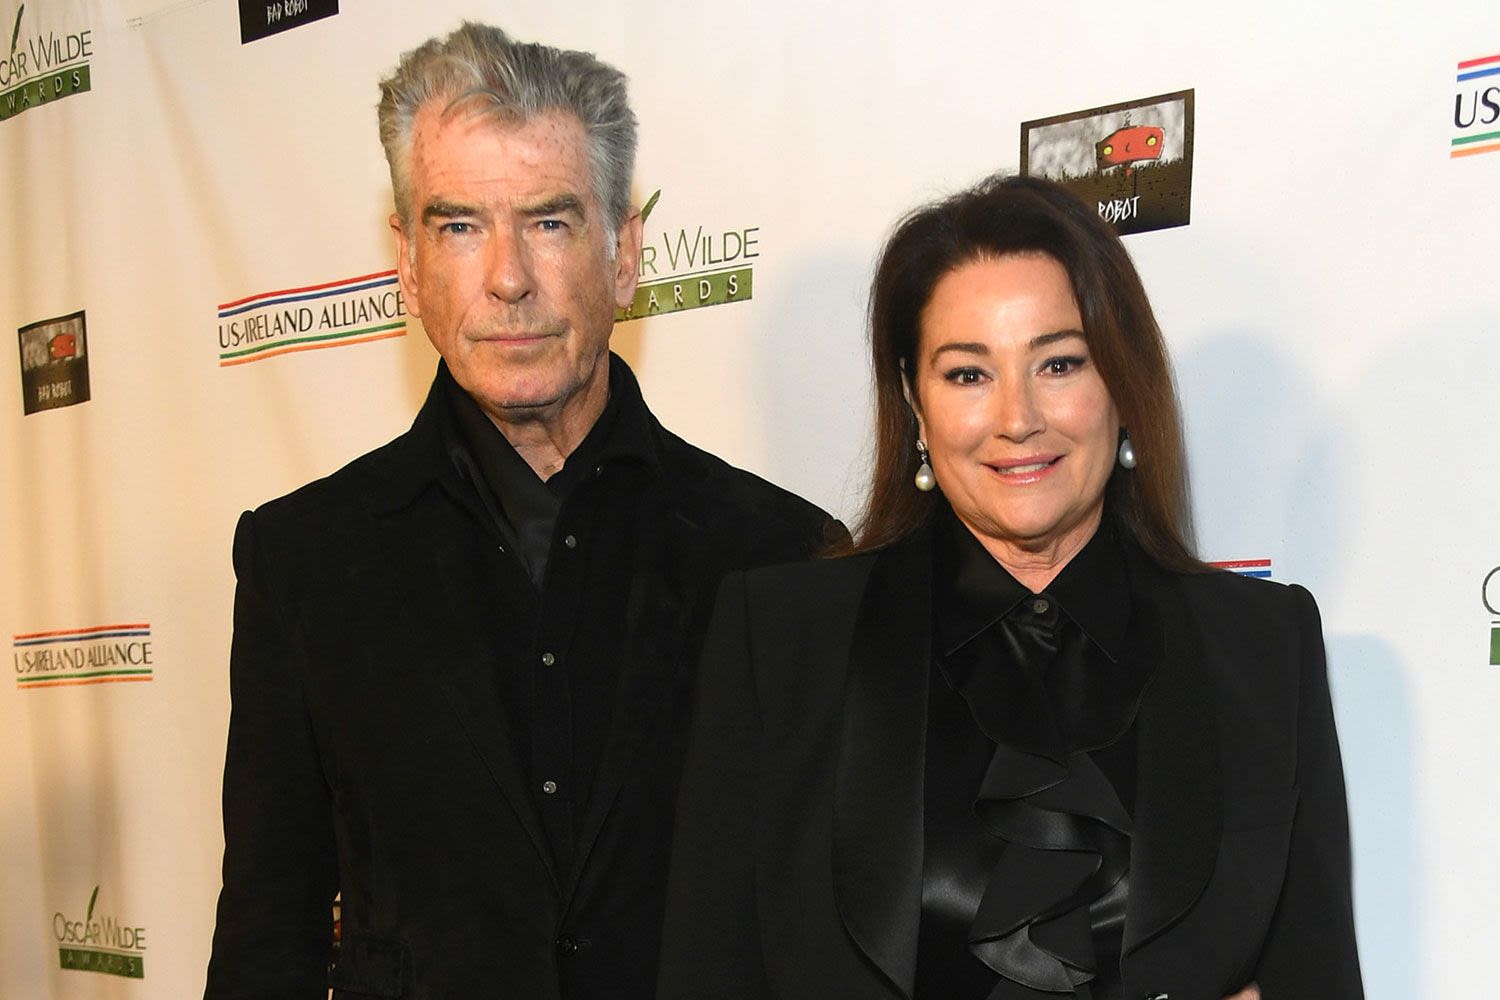 Pierce Brosnan Turns 71: Look Back at the 'Lucky Day' the Actor Met Wife Keely 30 Years Ago